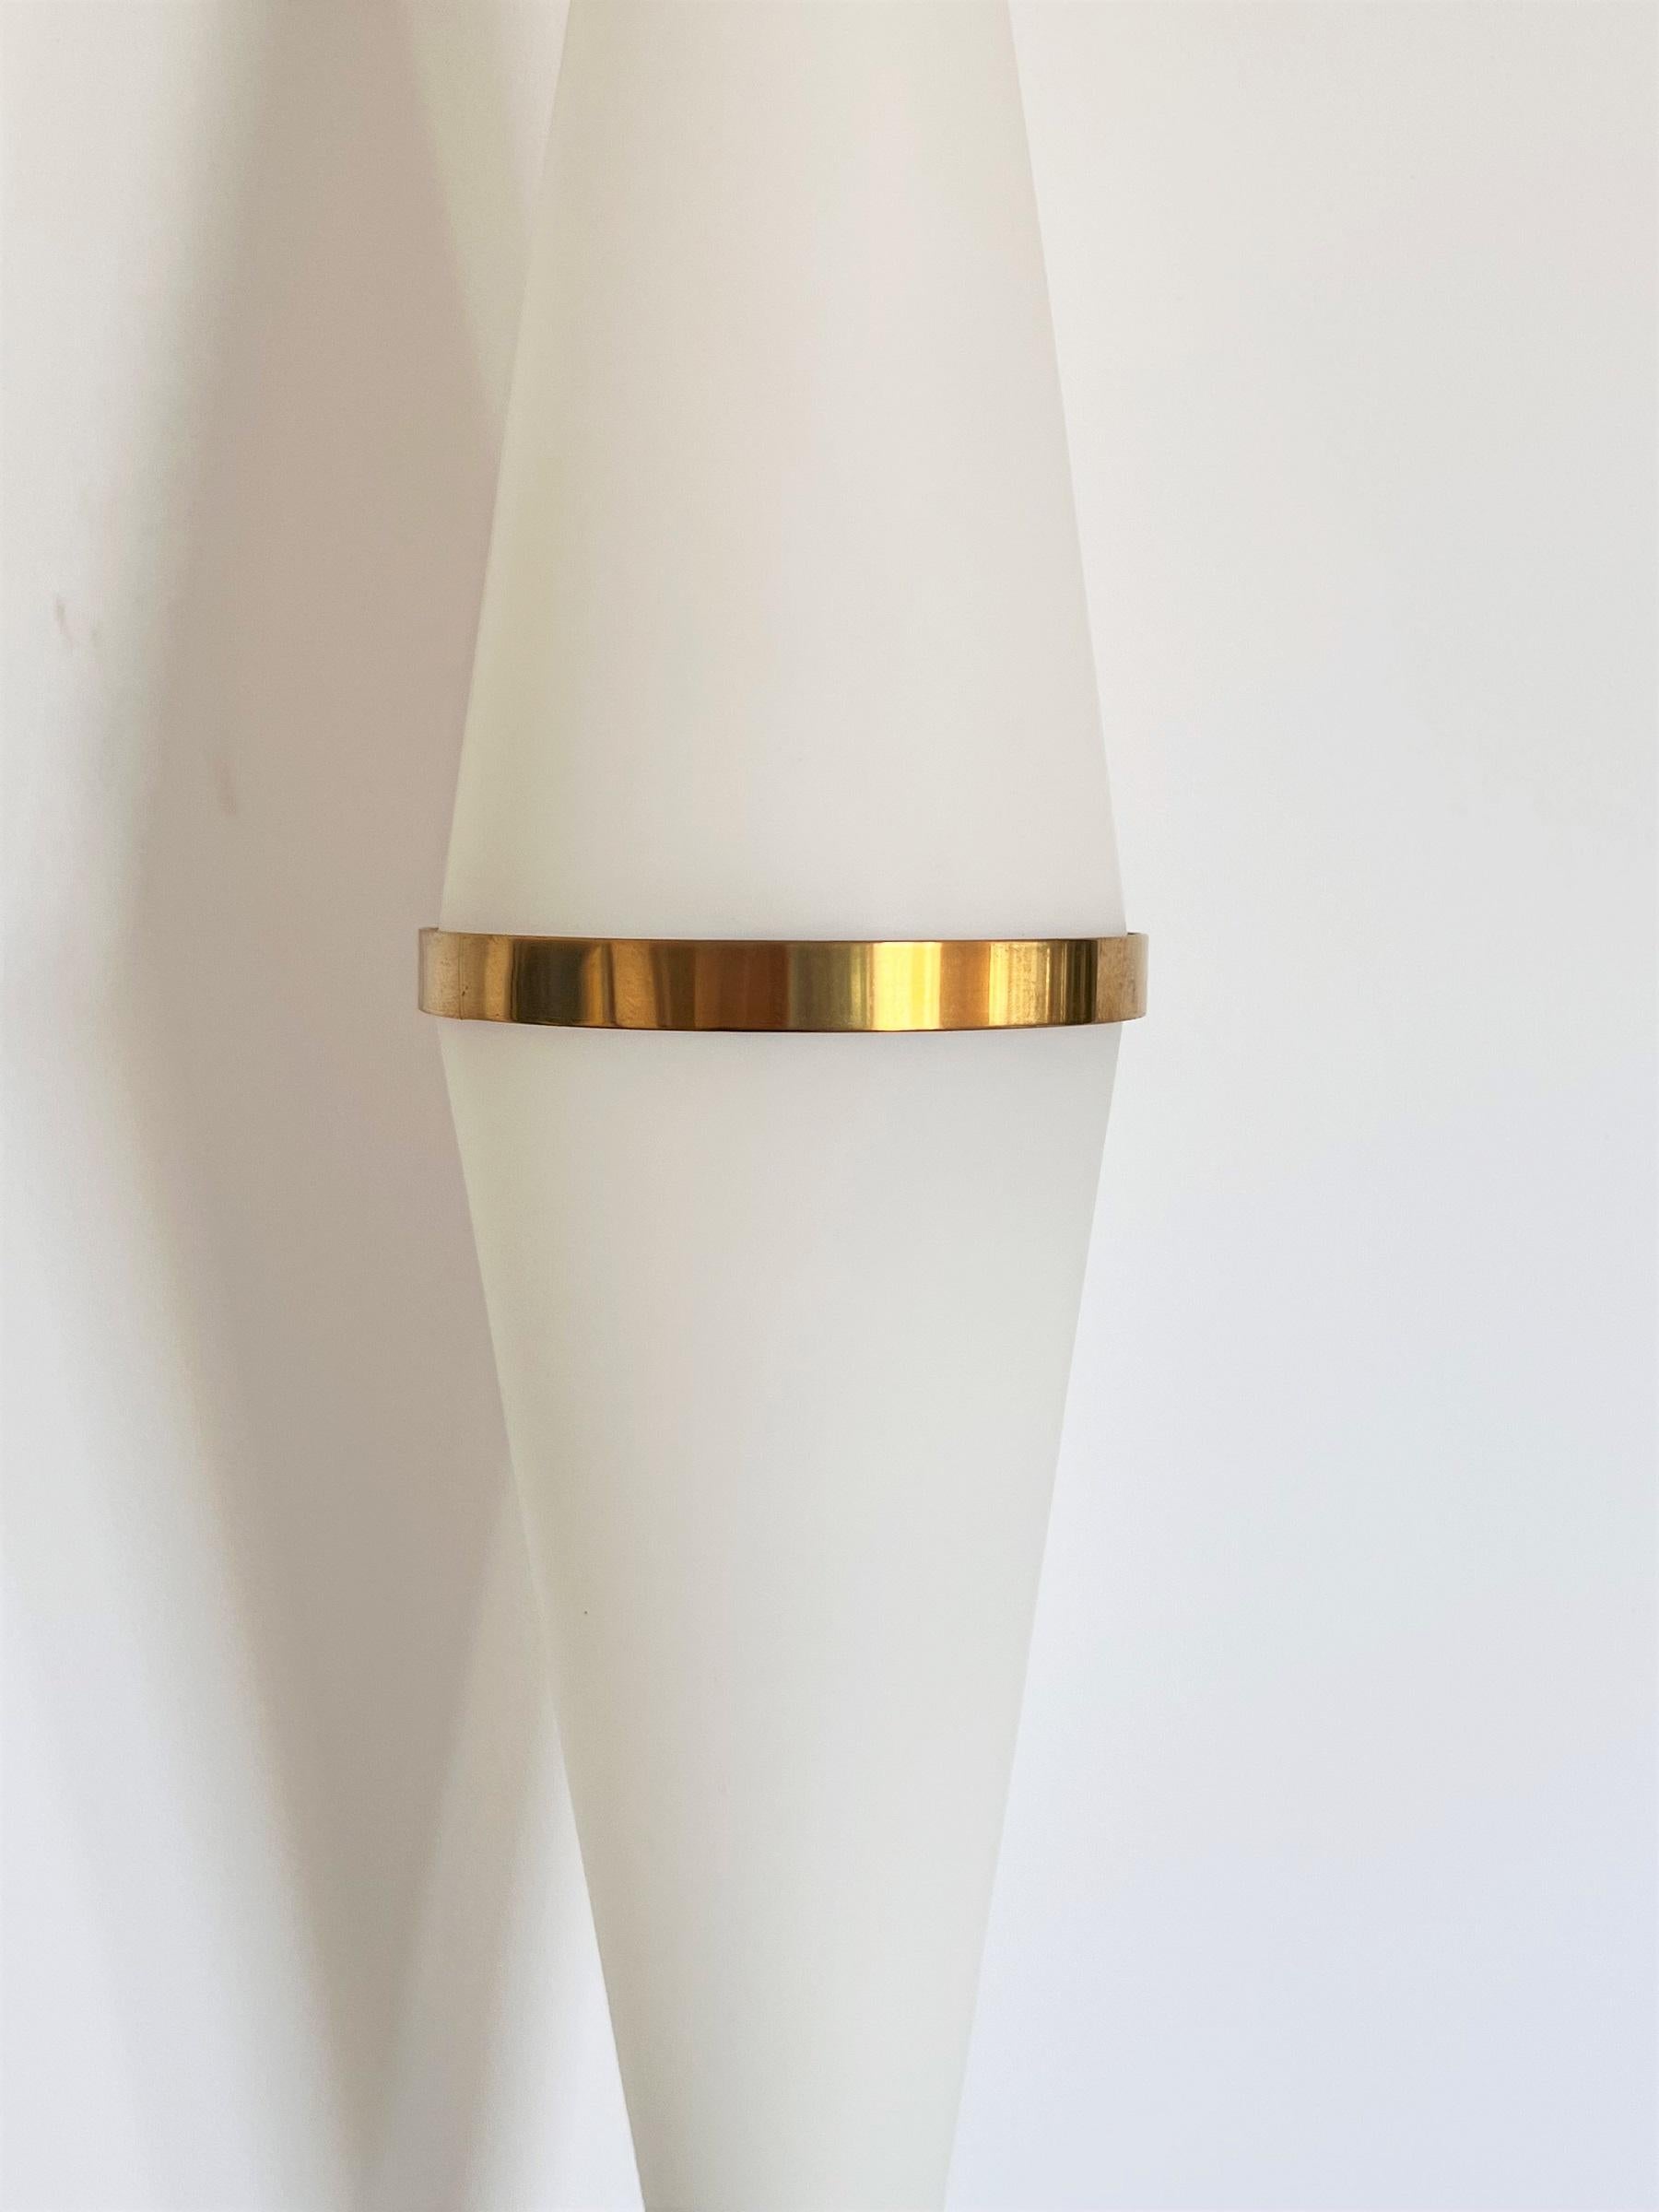 Milk Glass Italian Midcentury Floor Lamp in Glass, Brass and Marble by Reggiani, 1960s For Sale